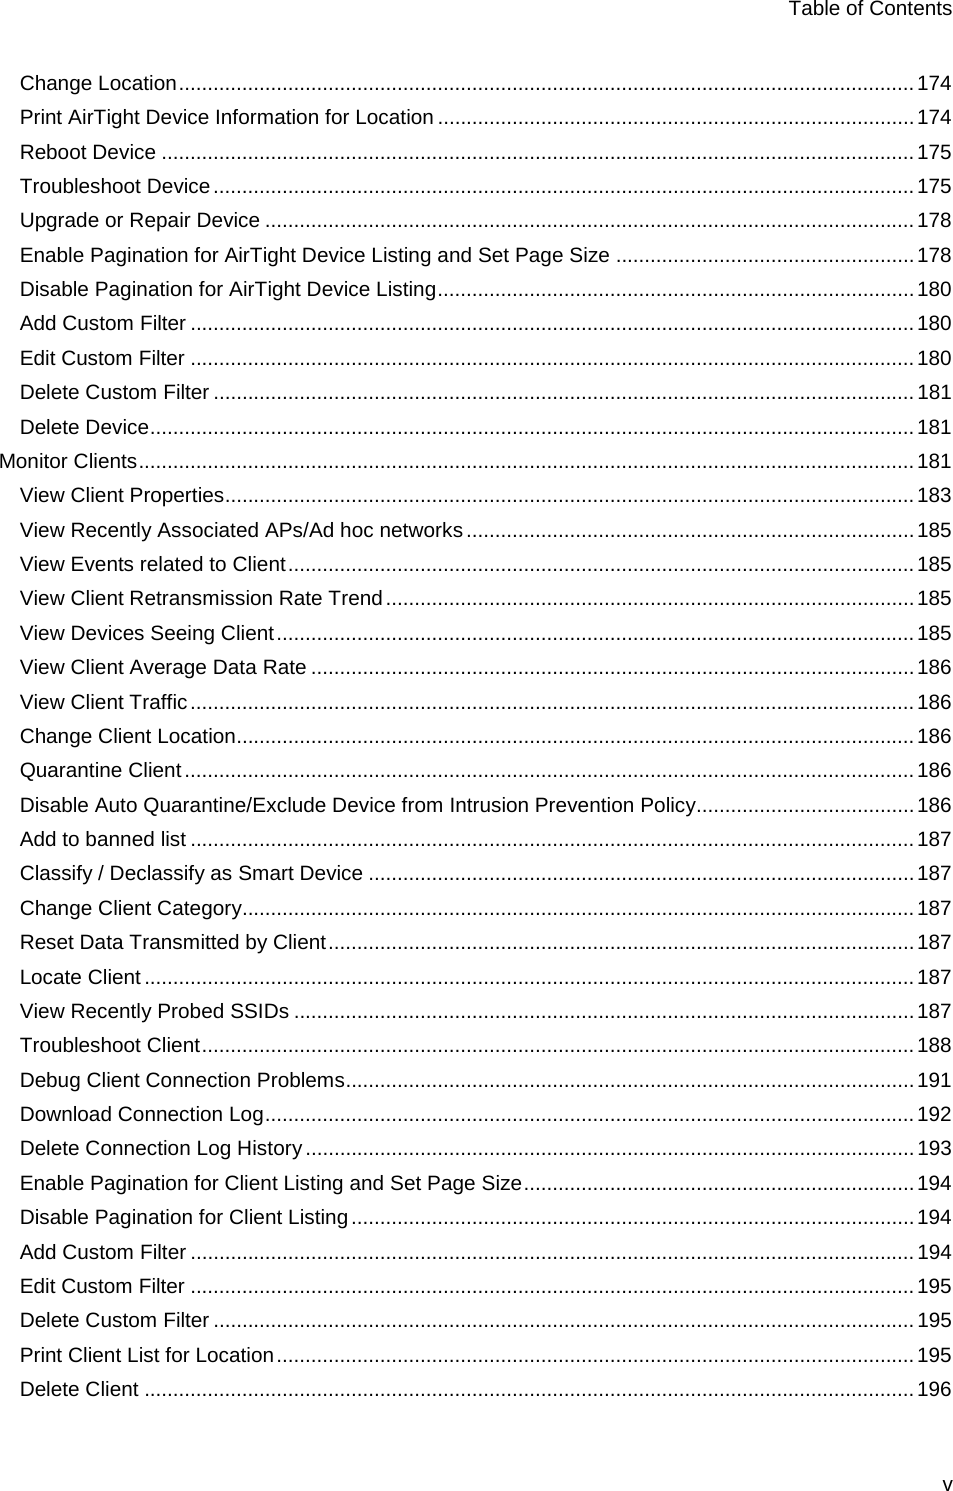 Table of Contents v Change Location ................................................................................................................................ 174 Print AirTight Device Information for Location ................................................................................... 174 Reboot Device ................................................................................................................................... 175 Troubleshoot Device .......................................................................................................................... 175 Upgrade or Repair Device ................................................................................................................. 178 Enable Pagination for AirTight Device Listing and Set Page Size .................................................... 178 Disable Pagination for AirTight Device Listing ................................................................................... 180 Add Custom Filter .............................................................................................................................. 180 Edit Custom Filter .............................................................................................................................. 180 Delete Custom Filter .......................................................................................................................... 181 Delete Device ..................................................................................................................................... 181 Monitor Clients ....................................................................................................................................... 181 View Client Properties........................................................................................................................ 183 View Recently Associated APs/Ad hoc networks .............................................................................. 185 View Events related to Client ............................................................................................................. 185 View Client Retransmission Rate Trend ............................................................................................ 185 View Devices Seeing Client ............................................................................................................... 185 View Client Average Data Rate ......................................................................................................... 186 View Client Traffic .............................................................................................................................. 186 Change Client Location...................................................................................................................... 186 Quarantine Client ............................................................................................................................... 186 Disable Auto Quarantine/Exclude Device from Intrusion Prevention Policy ...................................... 186 Add to banned list .............................................................................................................................. 187 Classify / Declassify as Smart Device ............................................................................................... 187 Change Client Category..................................................................................................................... 187 Reset Data Transmitted by Client ...................................................................................................... 187 Locate Client ...................................................................................................................................... 187 View Recently Probed SSIDs ............................................................................................................ 187 Troubleshoot Client ............................................................................................................................ 188 Debug Client Connection Problems ................................................................................................... 191 Download Connection Log ................................................................................................................. 192 Delete Connection Log History .......................................................................................................... 193 Enable Pagination for Client Listing and Set Page Size .................................................................... 194 Disable Pagination for Client Listing .................................................................................................. 194 Add Custom Filter .............................................................................................................................. 194 Edit Custom Filter .............................................................................................................................. 195 Delete Custom Filter .......................................................................................................................... 195 Print Client List for Location ............................................................................................................... 195 Delete Client ...................................................................................................................................... 196 